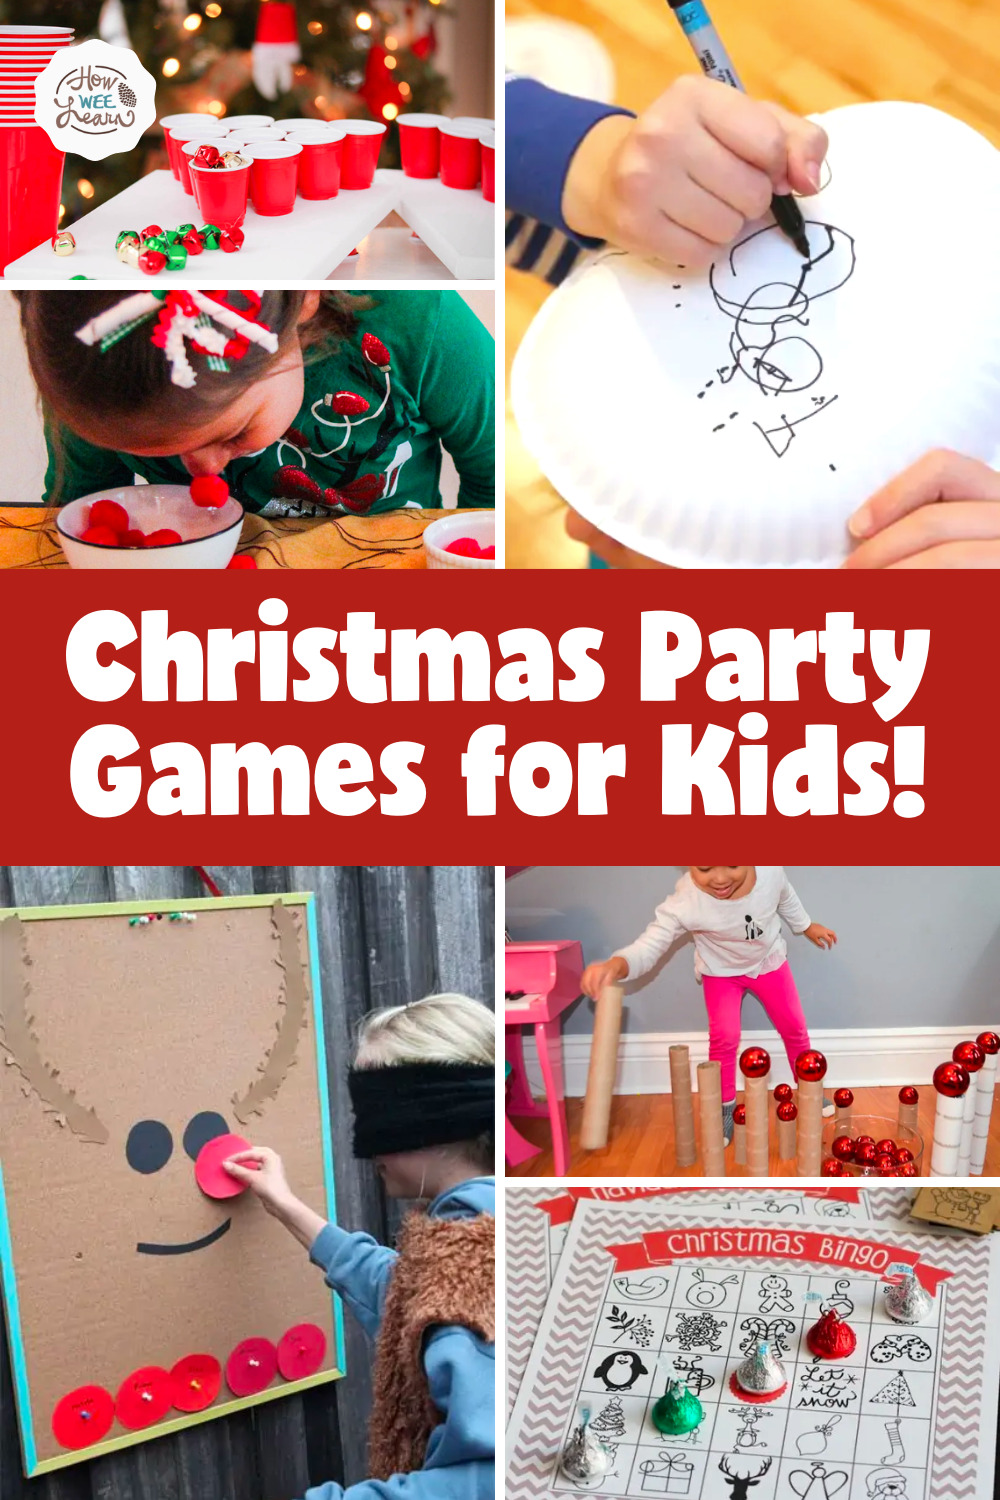 Fun Christmas Party Games for Kids!